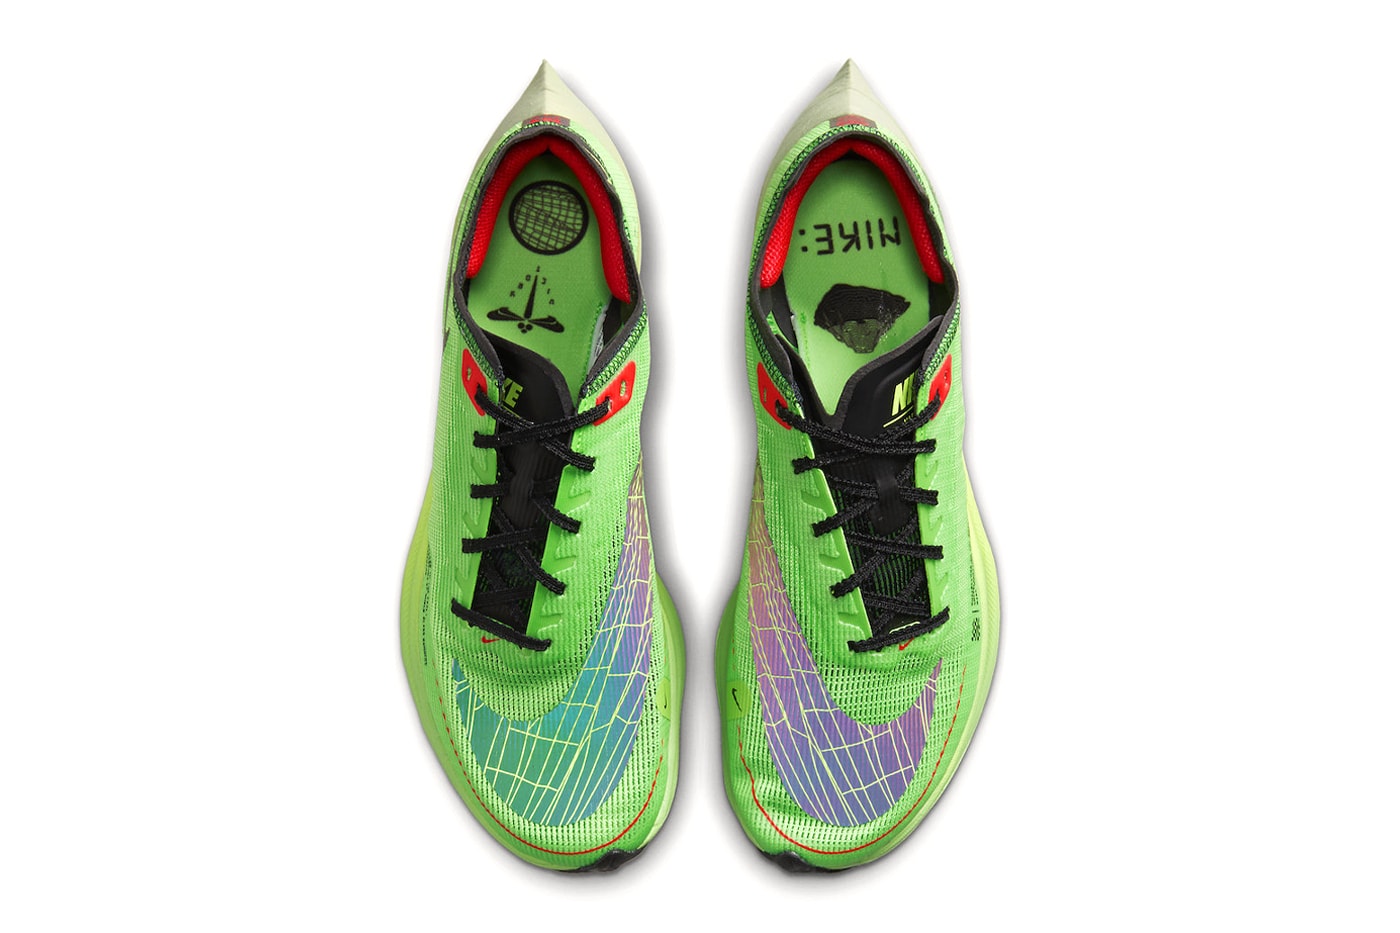 Nike ZoomX Vaporfly next percent 2 ekiden japan grinch green red black release info date price